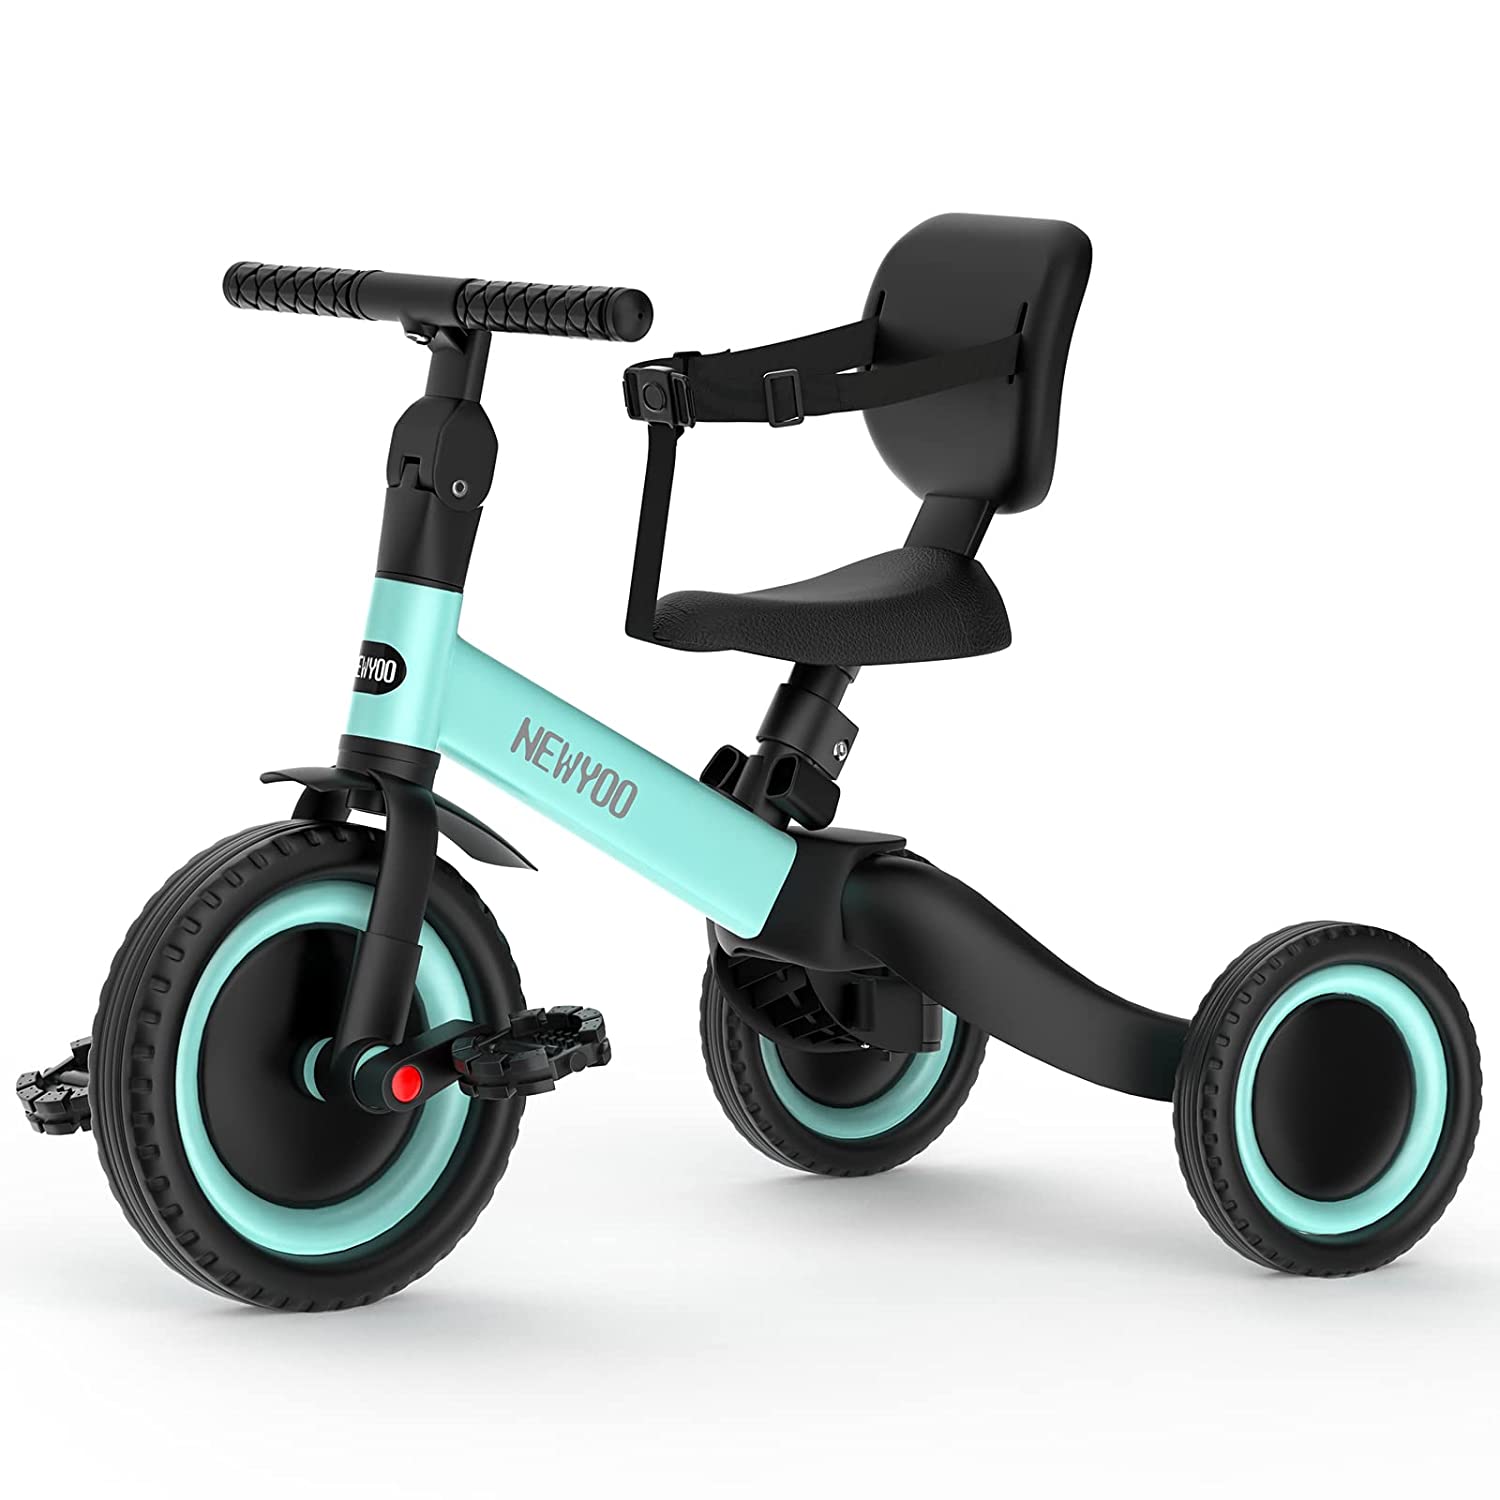 Newyoo Toddler Tricycle